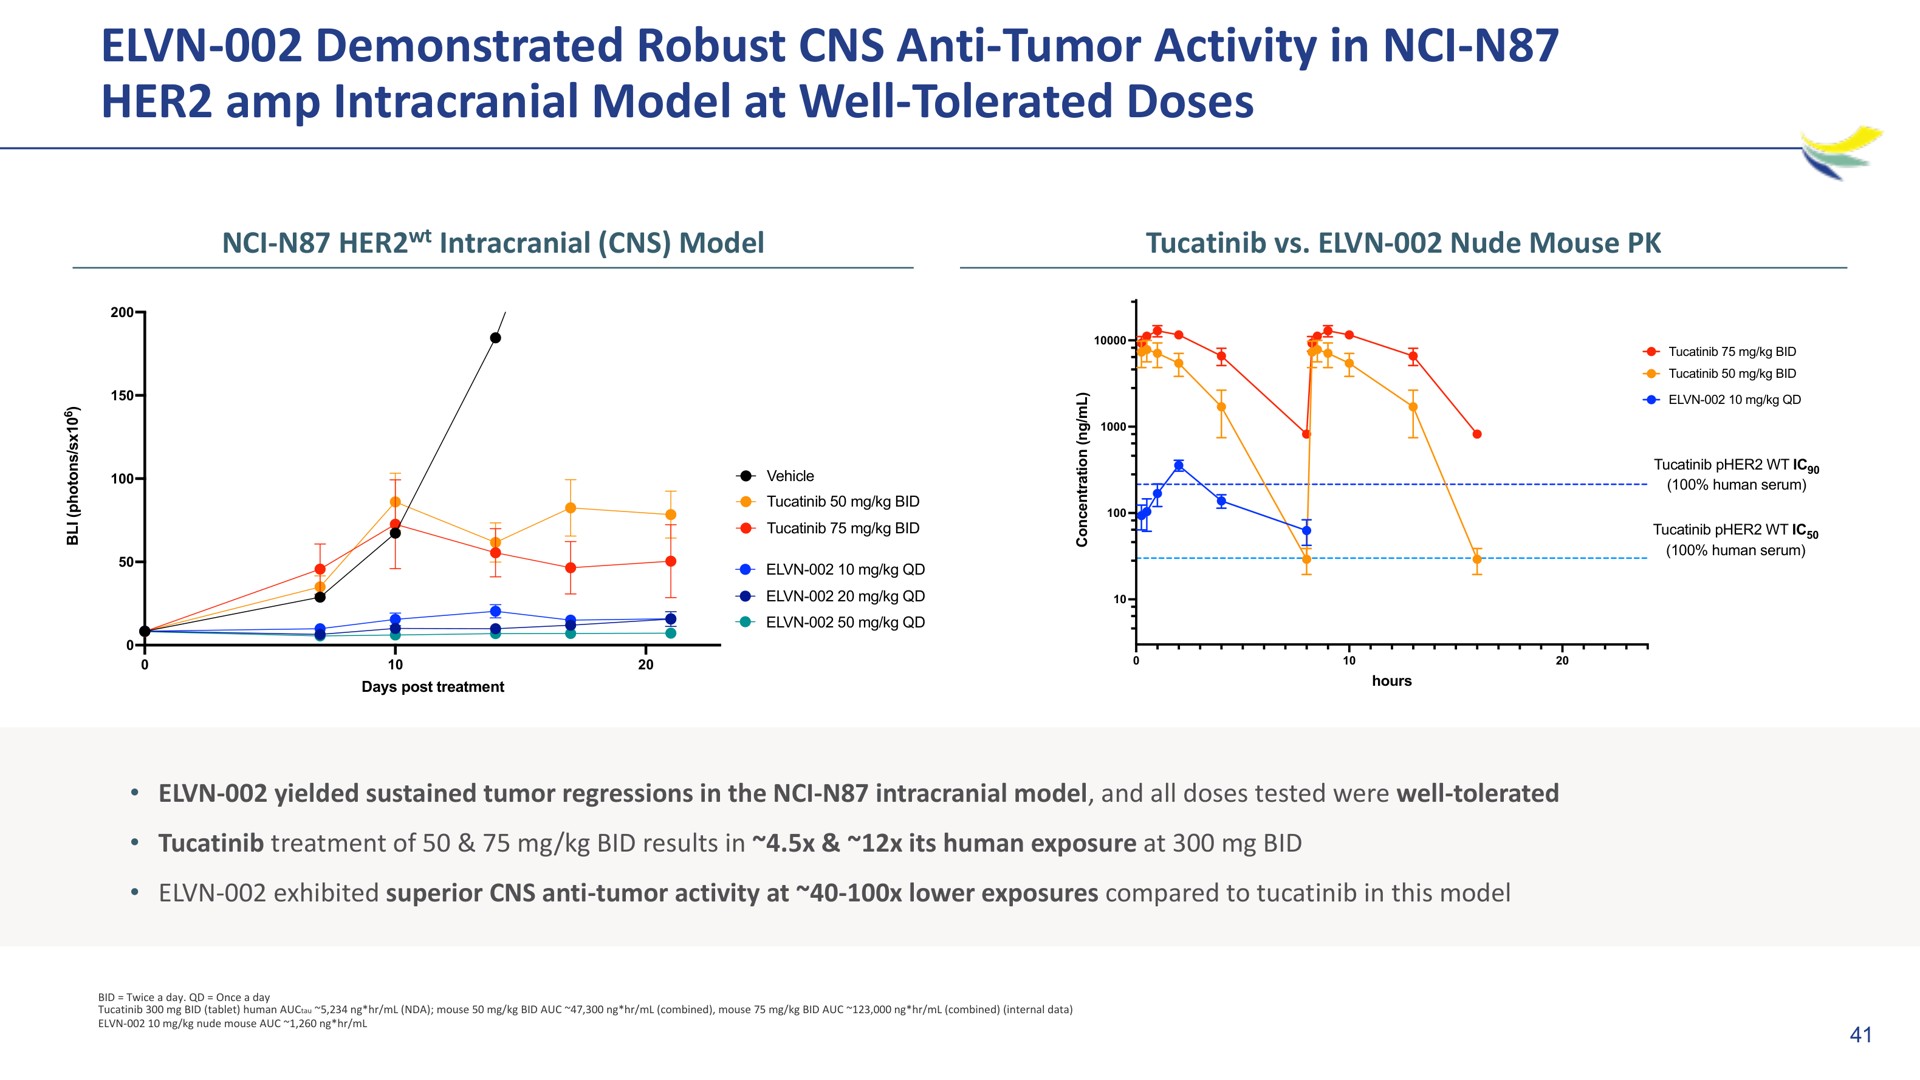 demonstrated robust anti tumor activity in her intracranial model at well tolerated doses | Imara